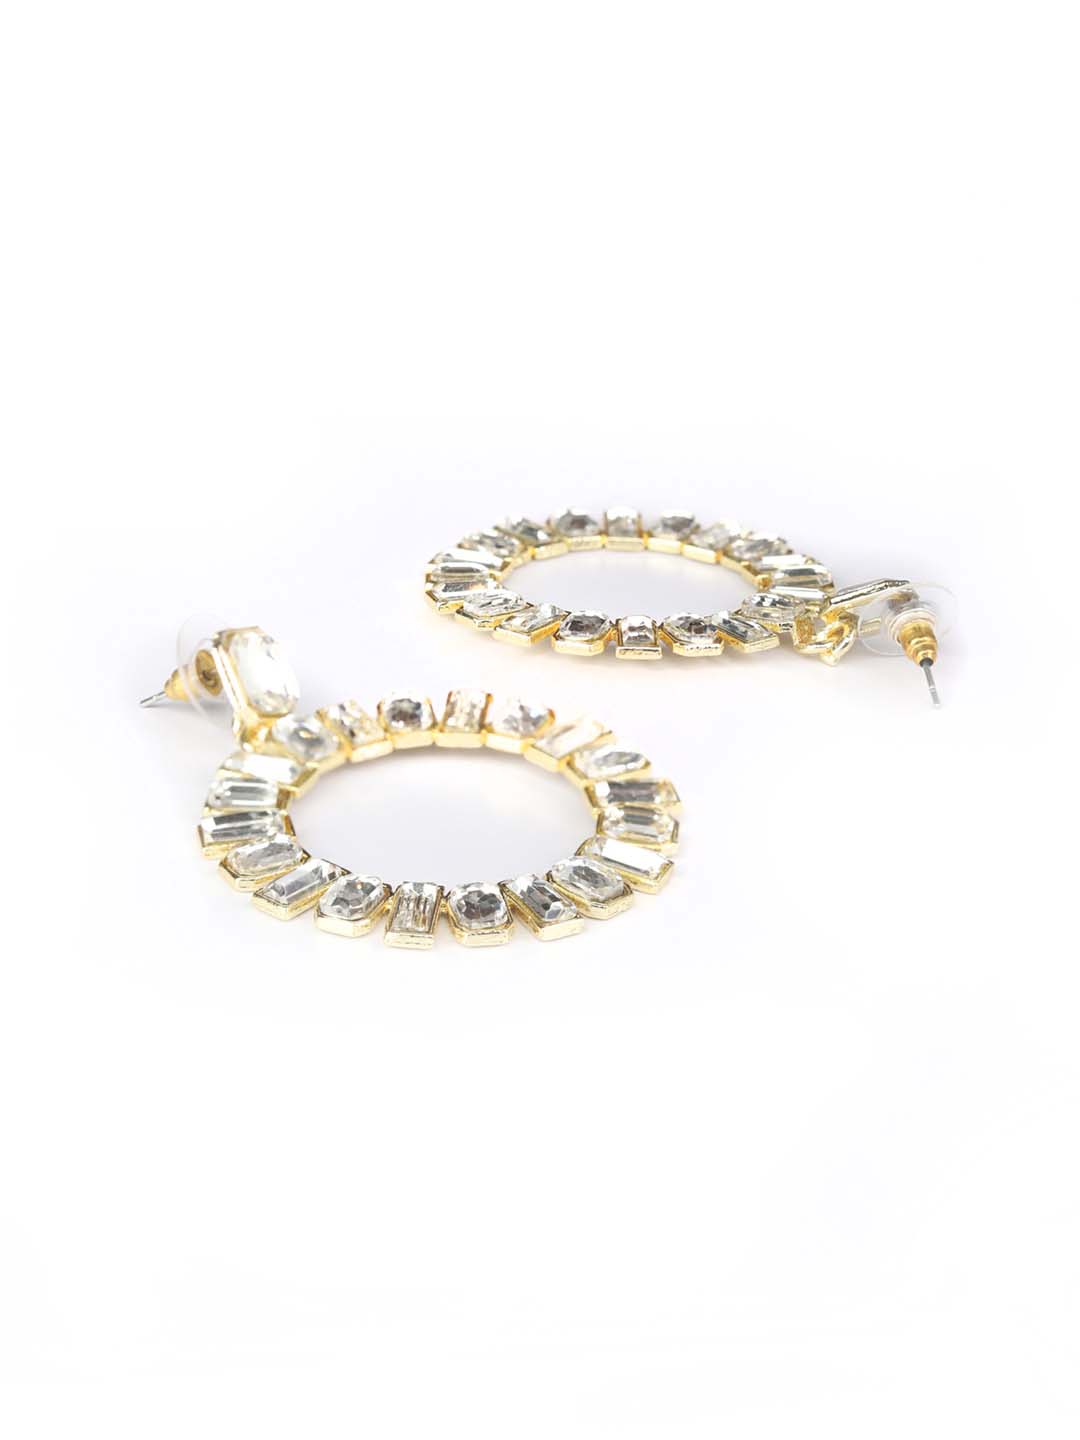 Stones Studded Gold Plated Hoop Earring